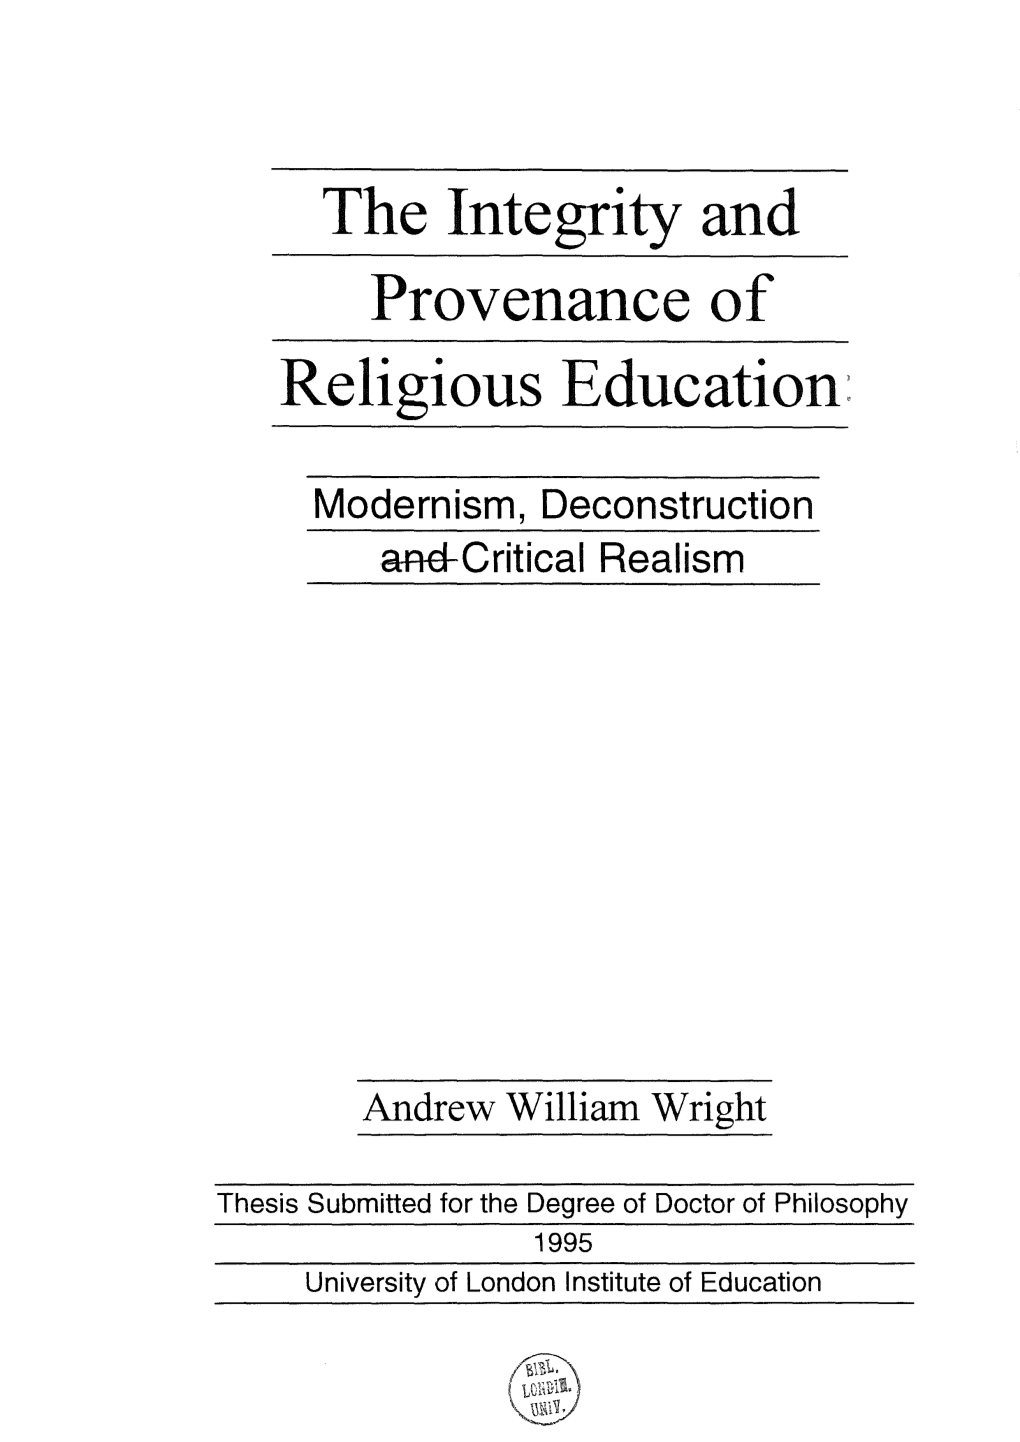 The Integrity and Provenance of Religious Education